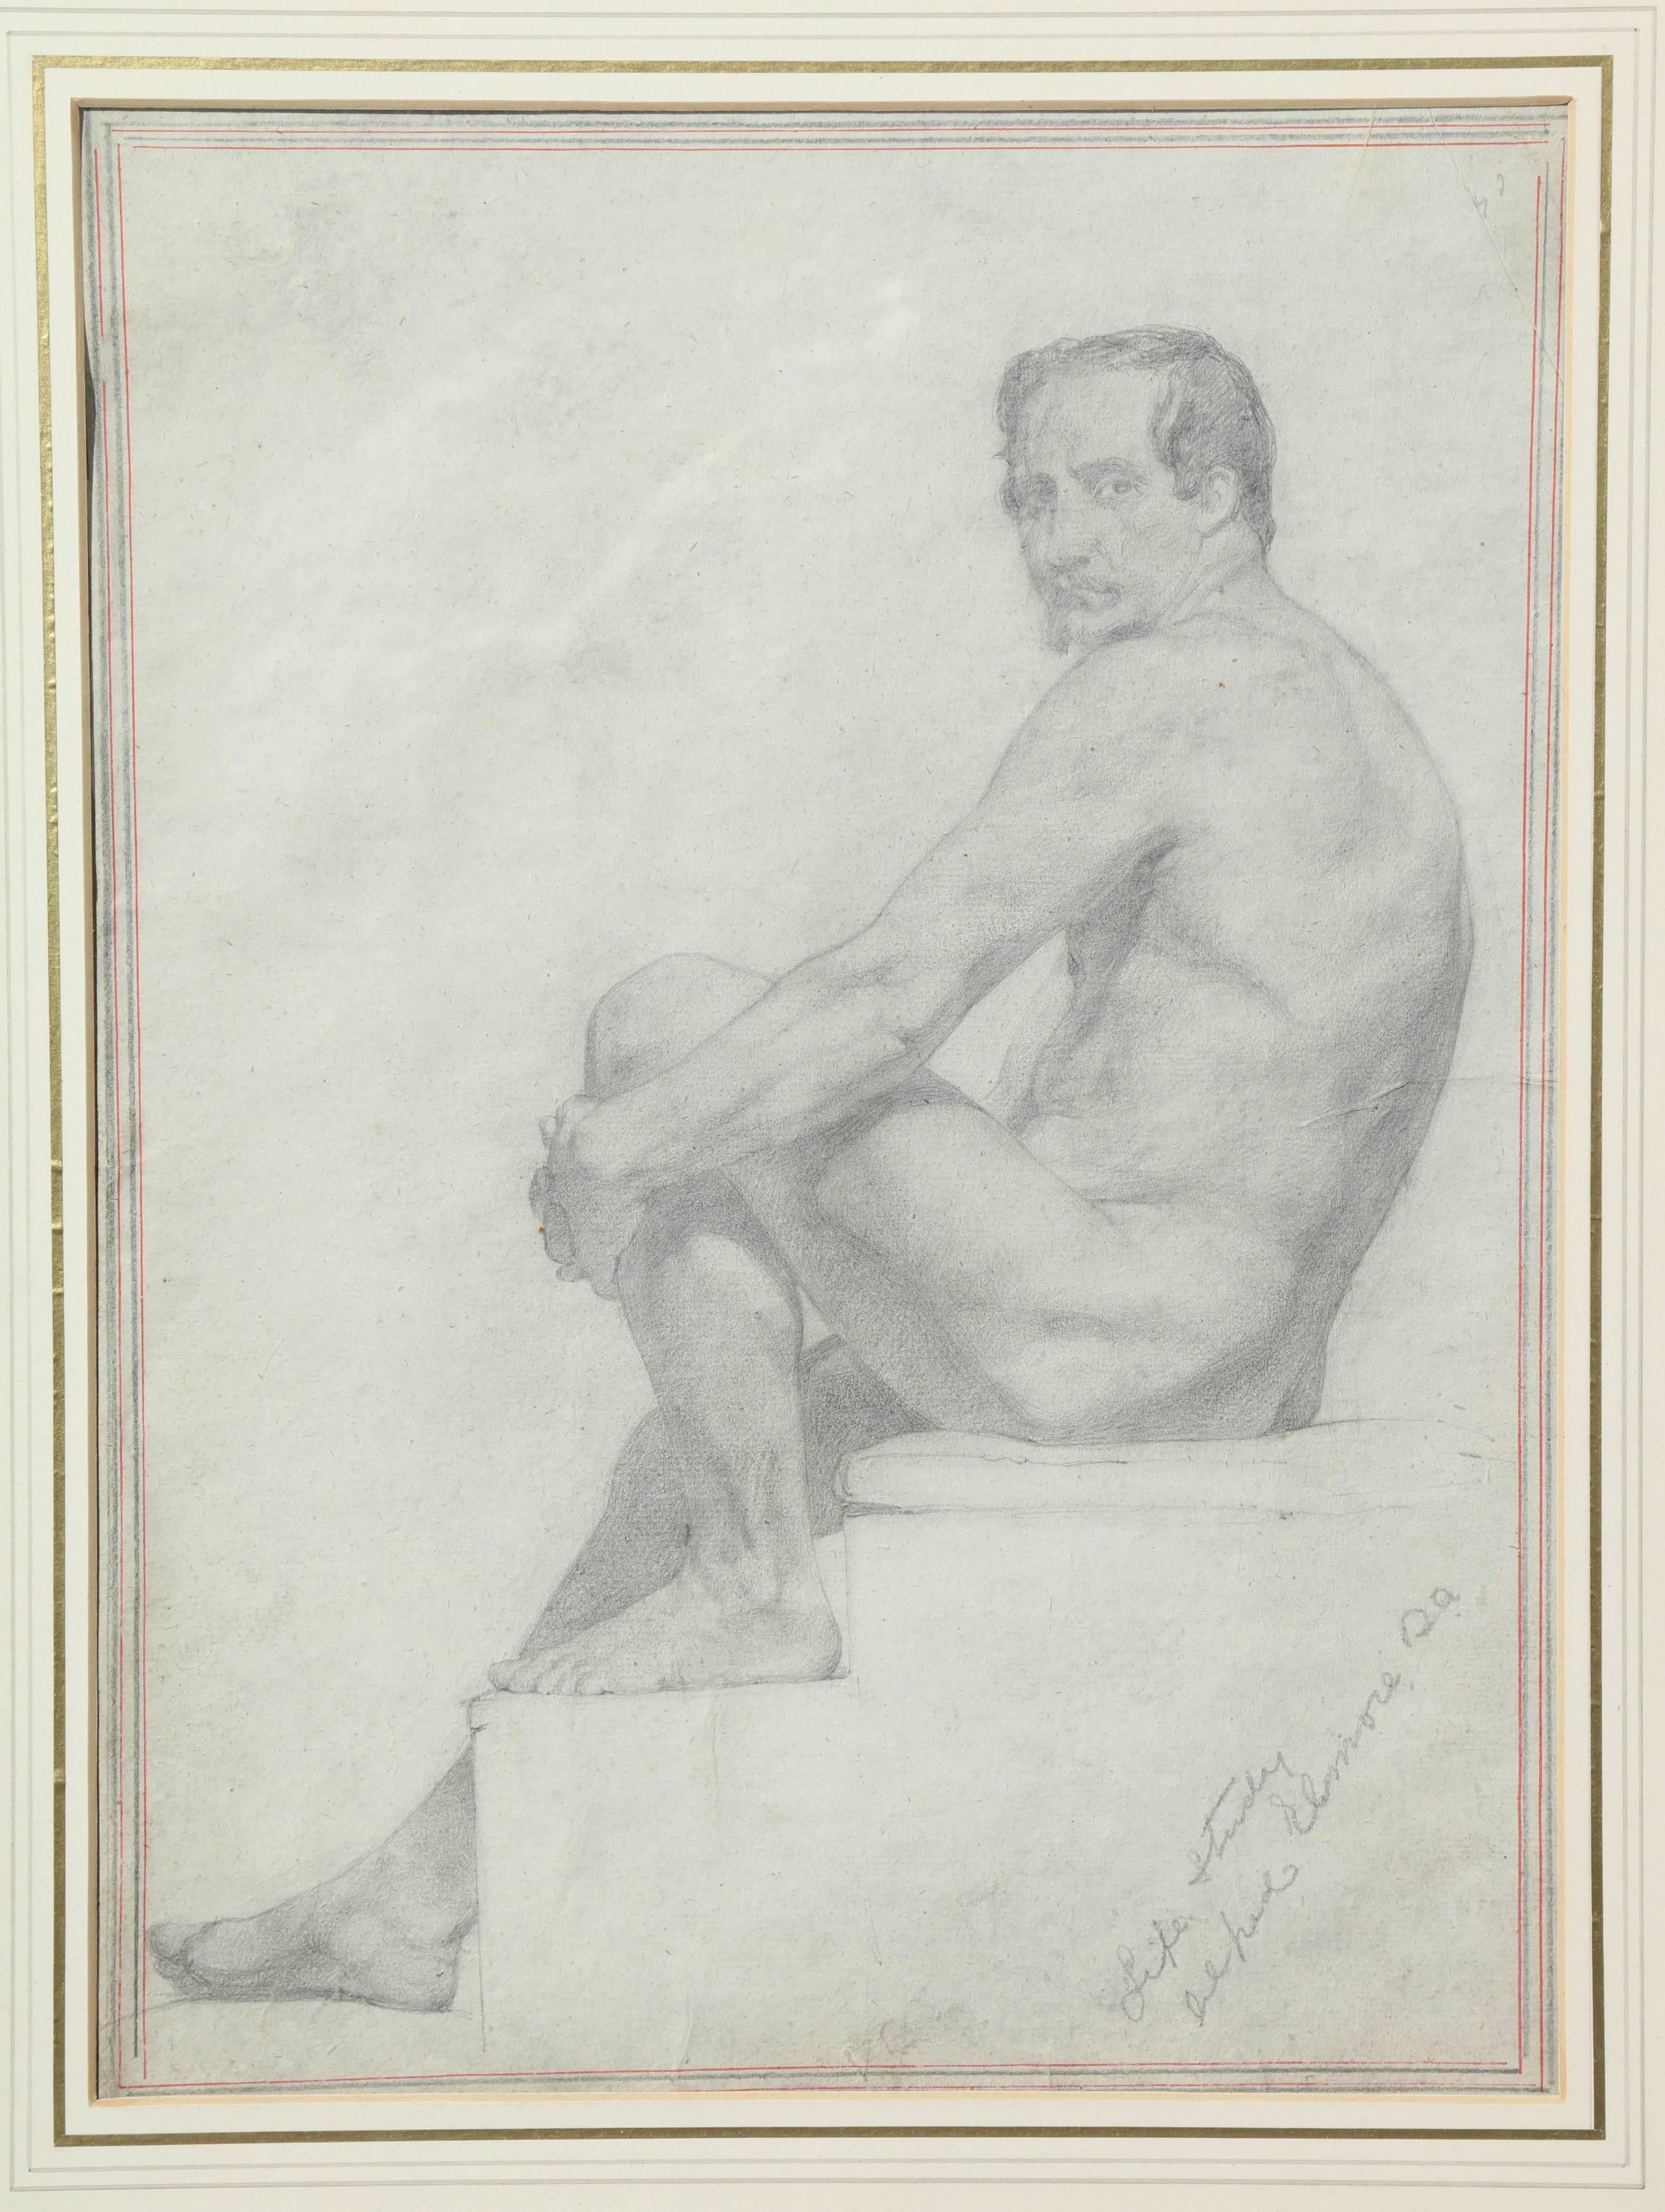 Mid-19th century Irish drawing of a male nude by Alfred Elmore.